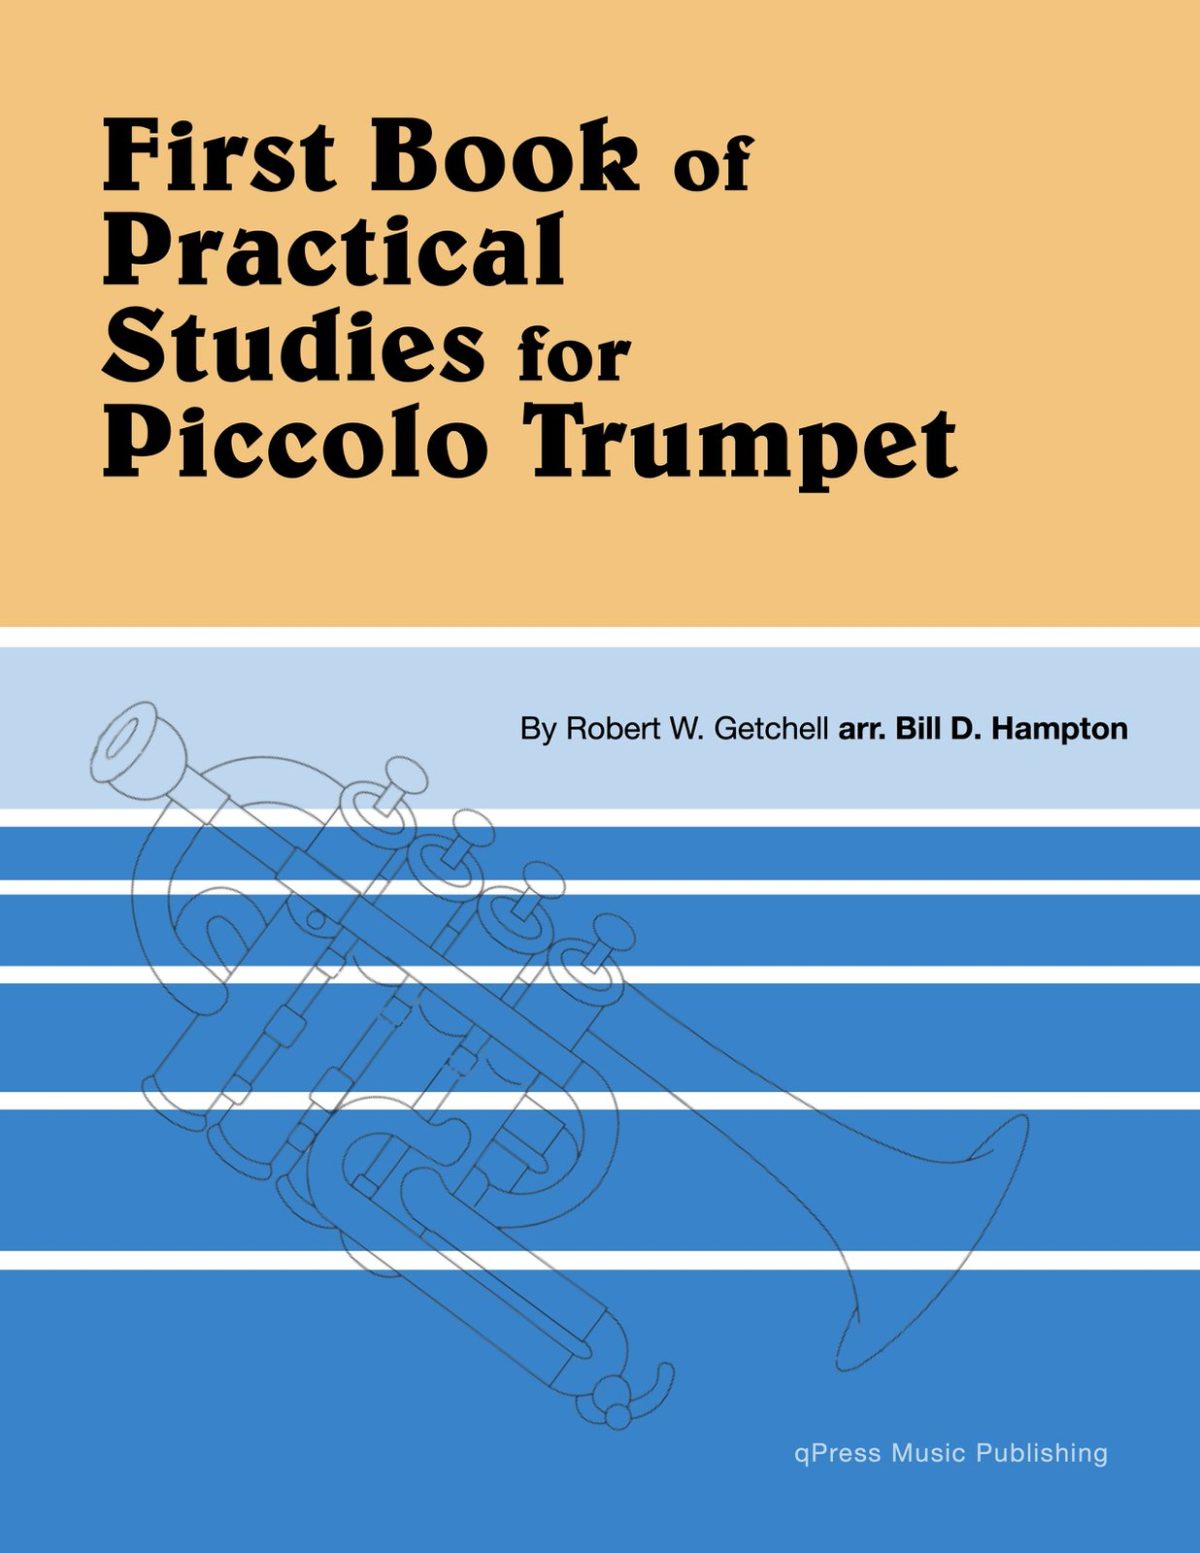 Getchell, First Book of Practical Studies for Piccolo Trumpet-p01